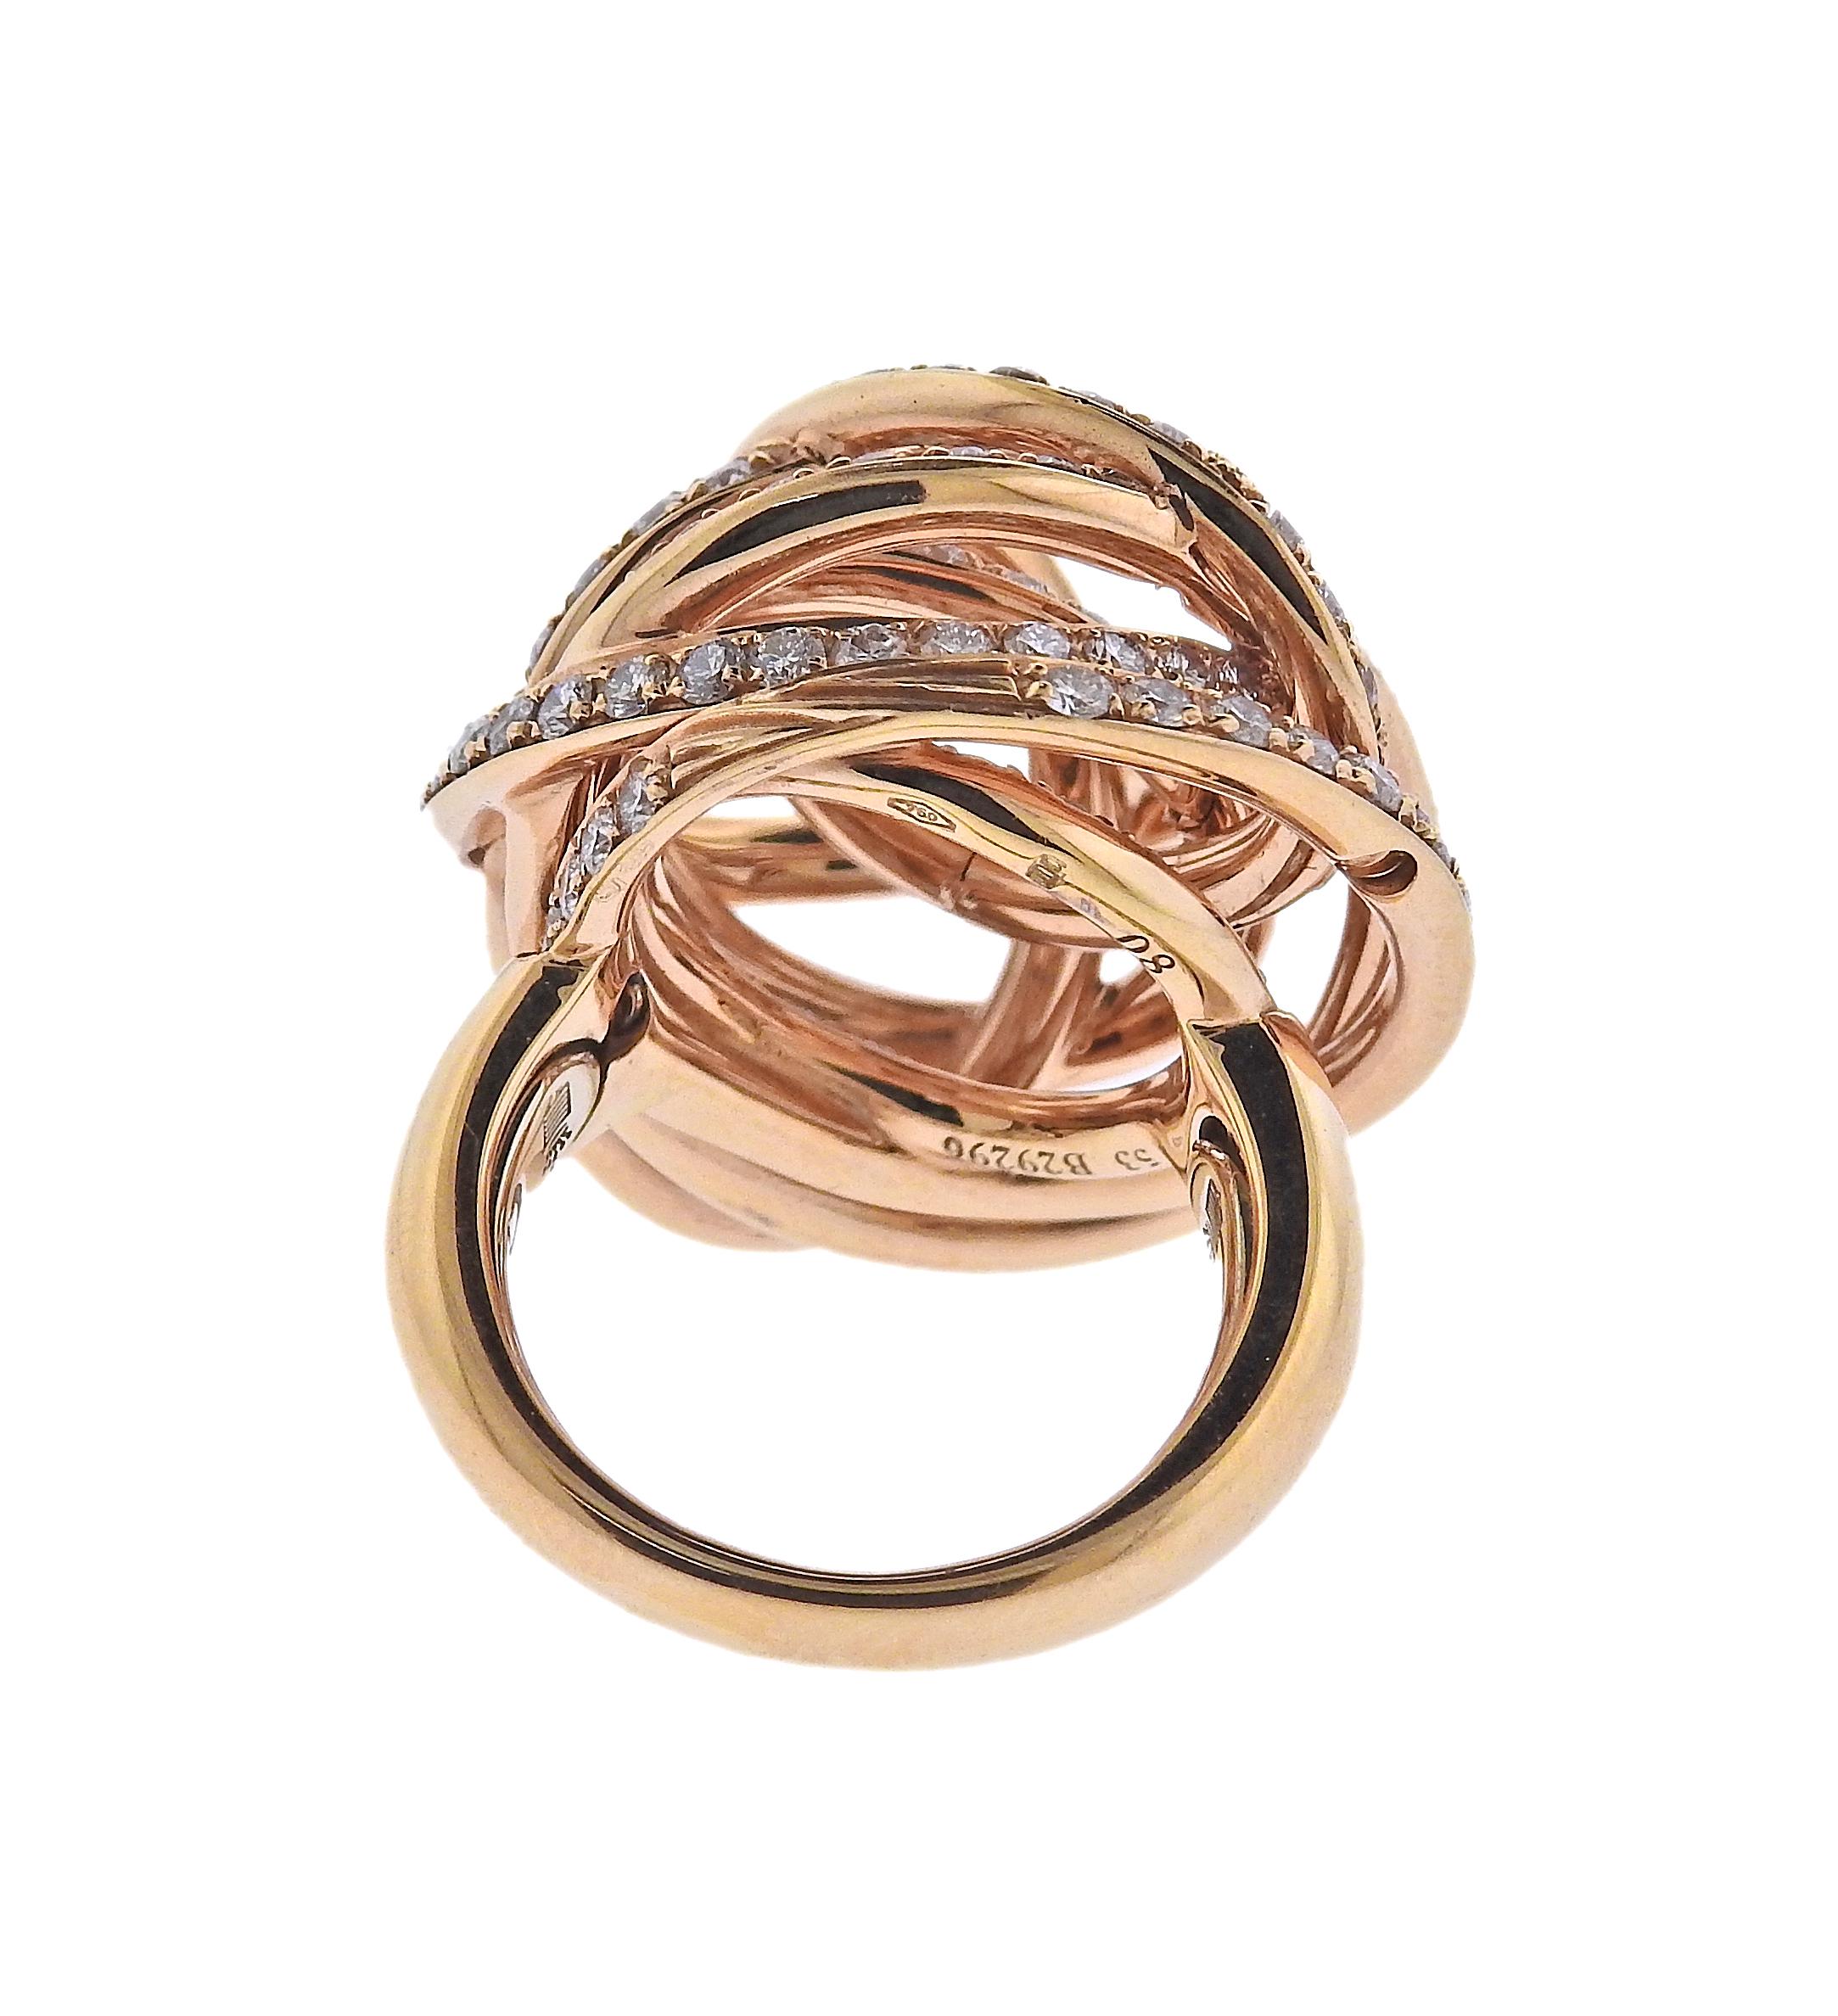 De Grisogono 18k rose gold Matassa ring, with 3.70ctw FG/VVS diamonds. Ring size 6.5, top of the ring measures 25mm x 25mm. Marked: De Grisogono, 80,B29296, Au750. Weight is 21.1 grams. Comes with COA. New/store sample, with tag.